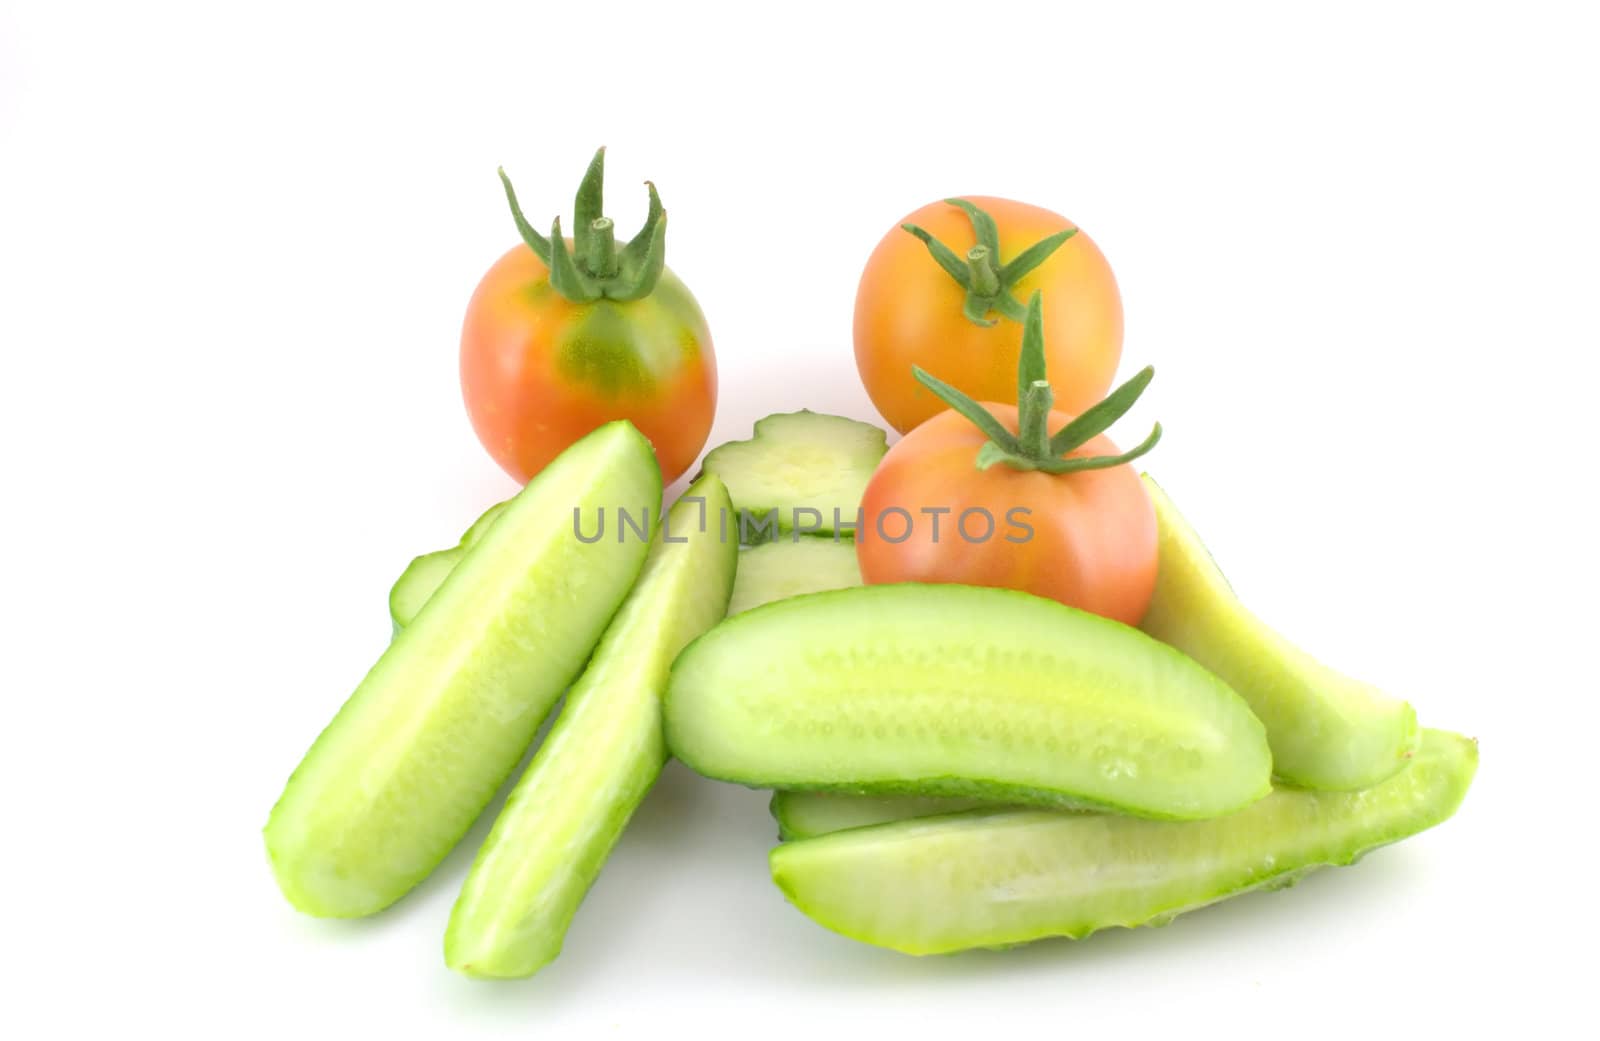 Cutted cucumber and tomatoes over white